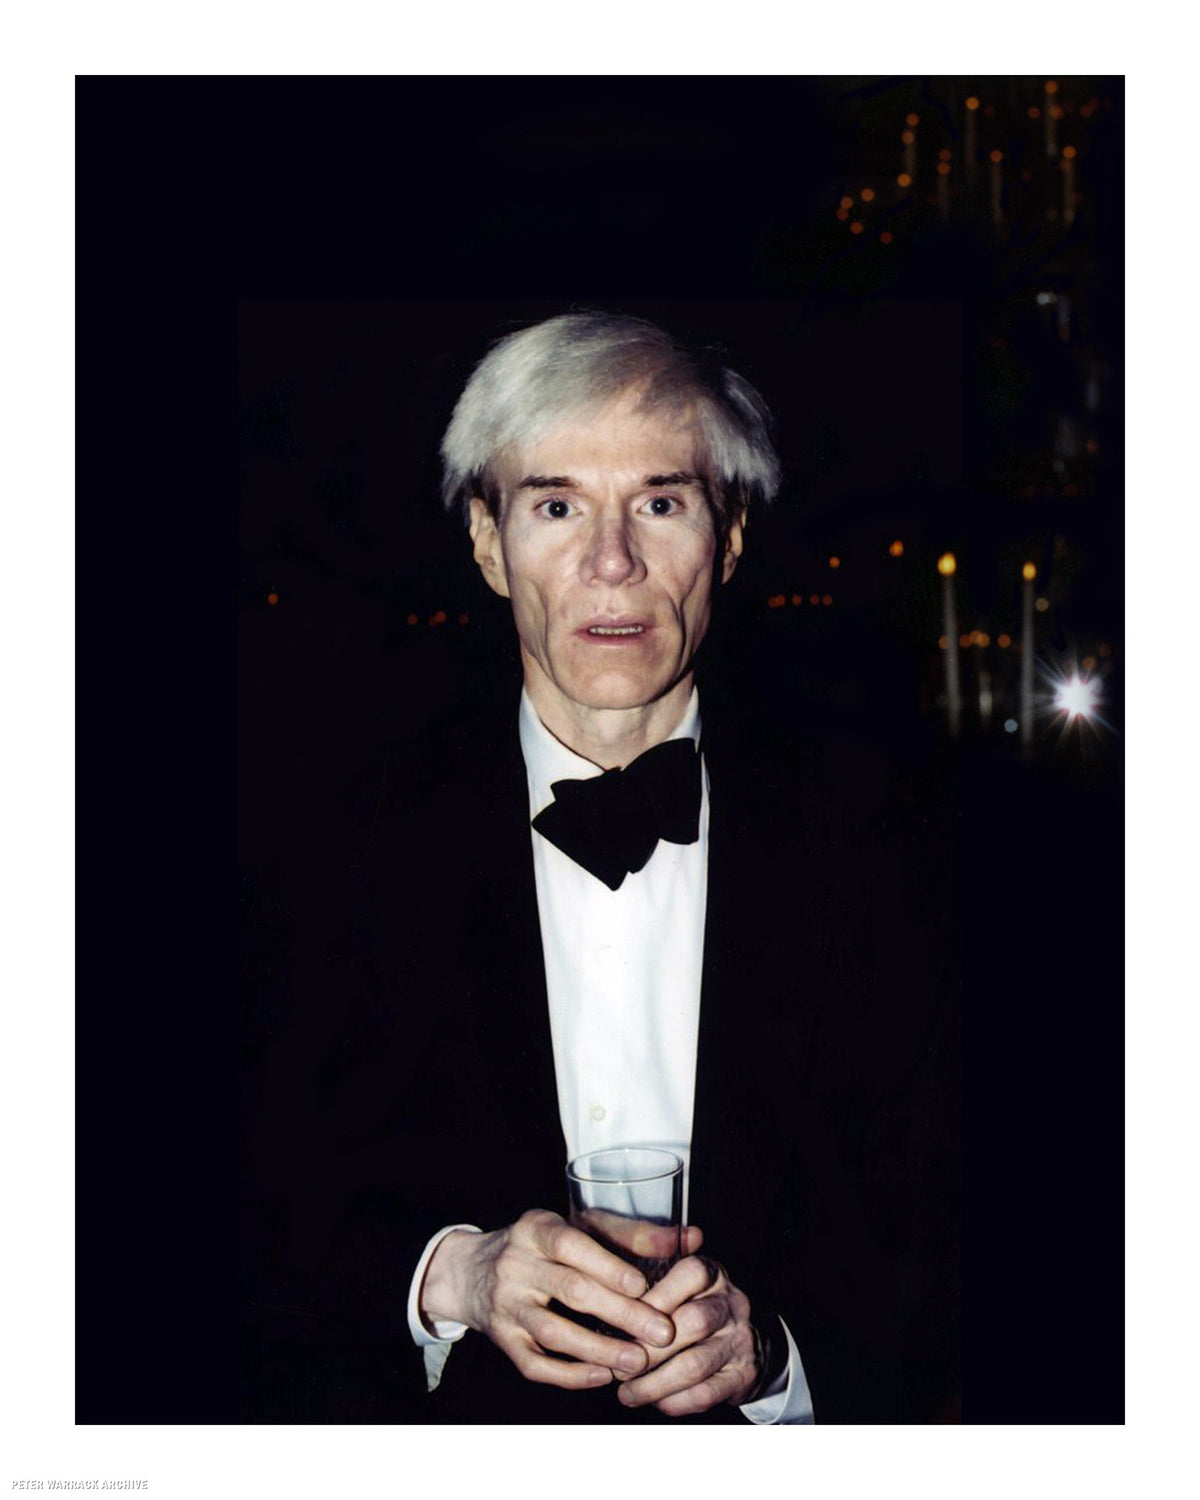 Andy Warhol (by Peter Warrack) - Limited Edition, Archival Print - 16x20&quot;